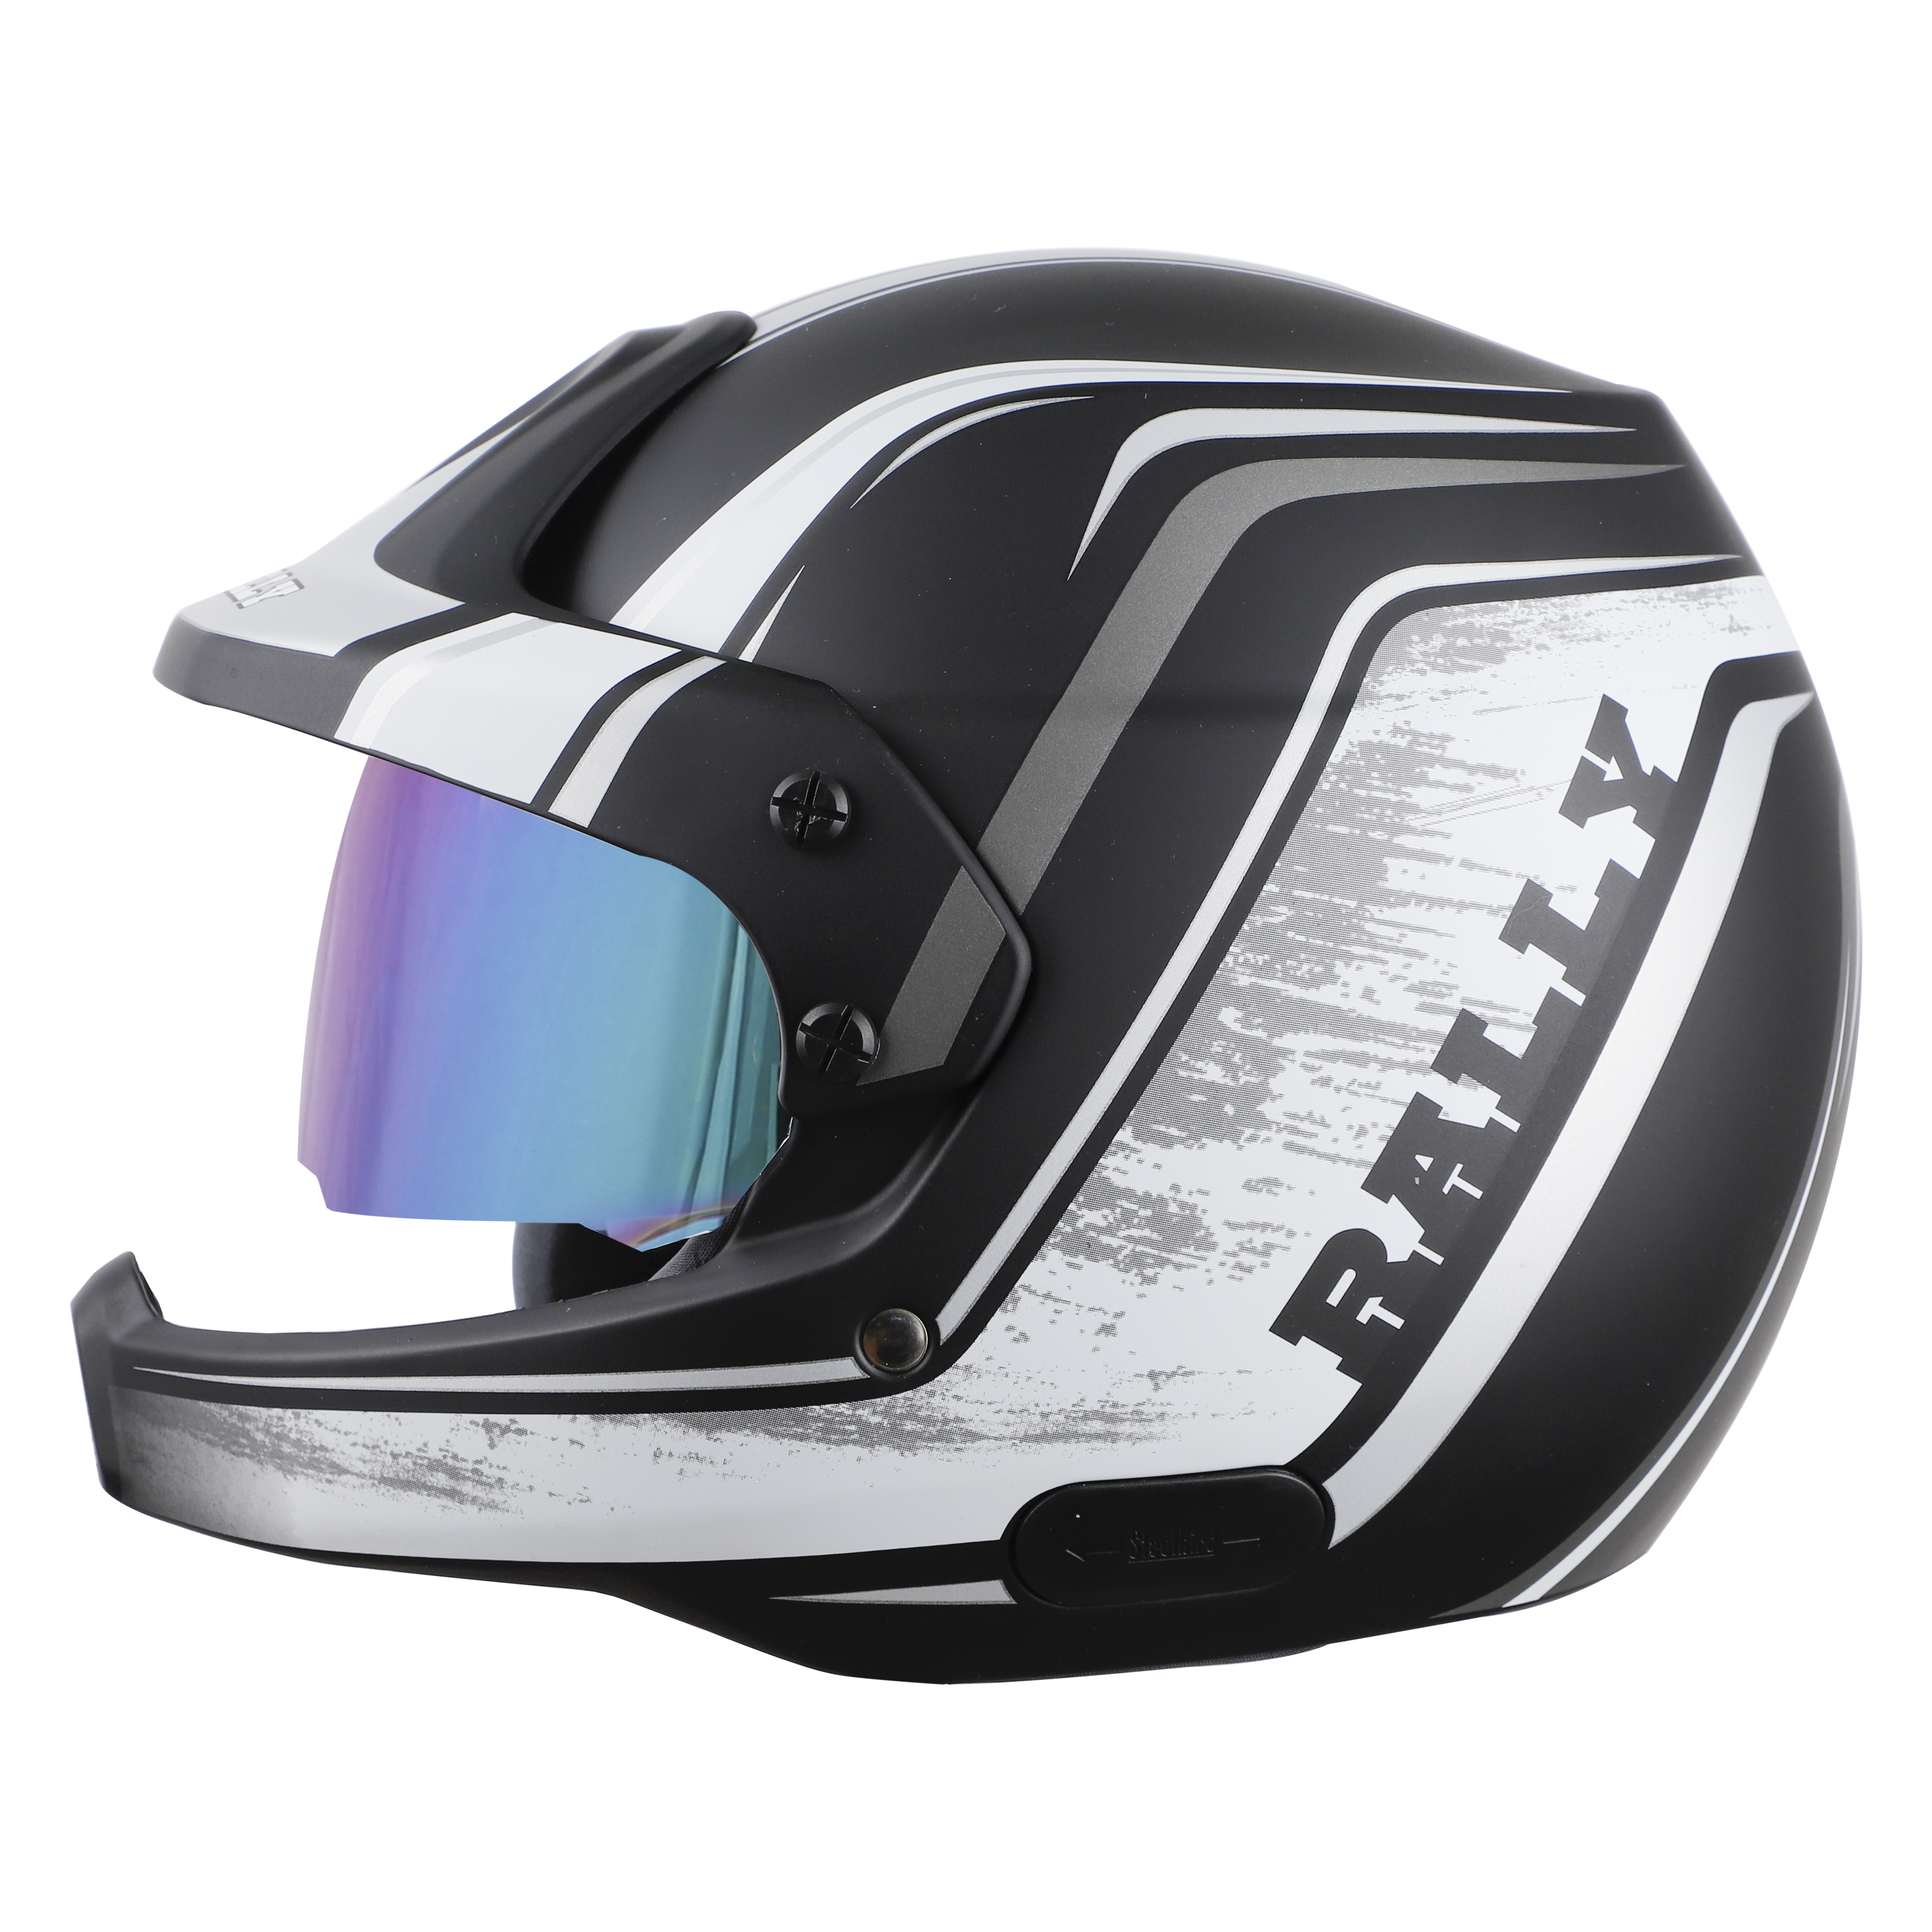 SB-51 RALLY RUT GLOSSY BLACK WITH GREY ( FITTED WITH CLEAR VISOR EXTRA CHROME RAINBOW VISOR FREE)